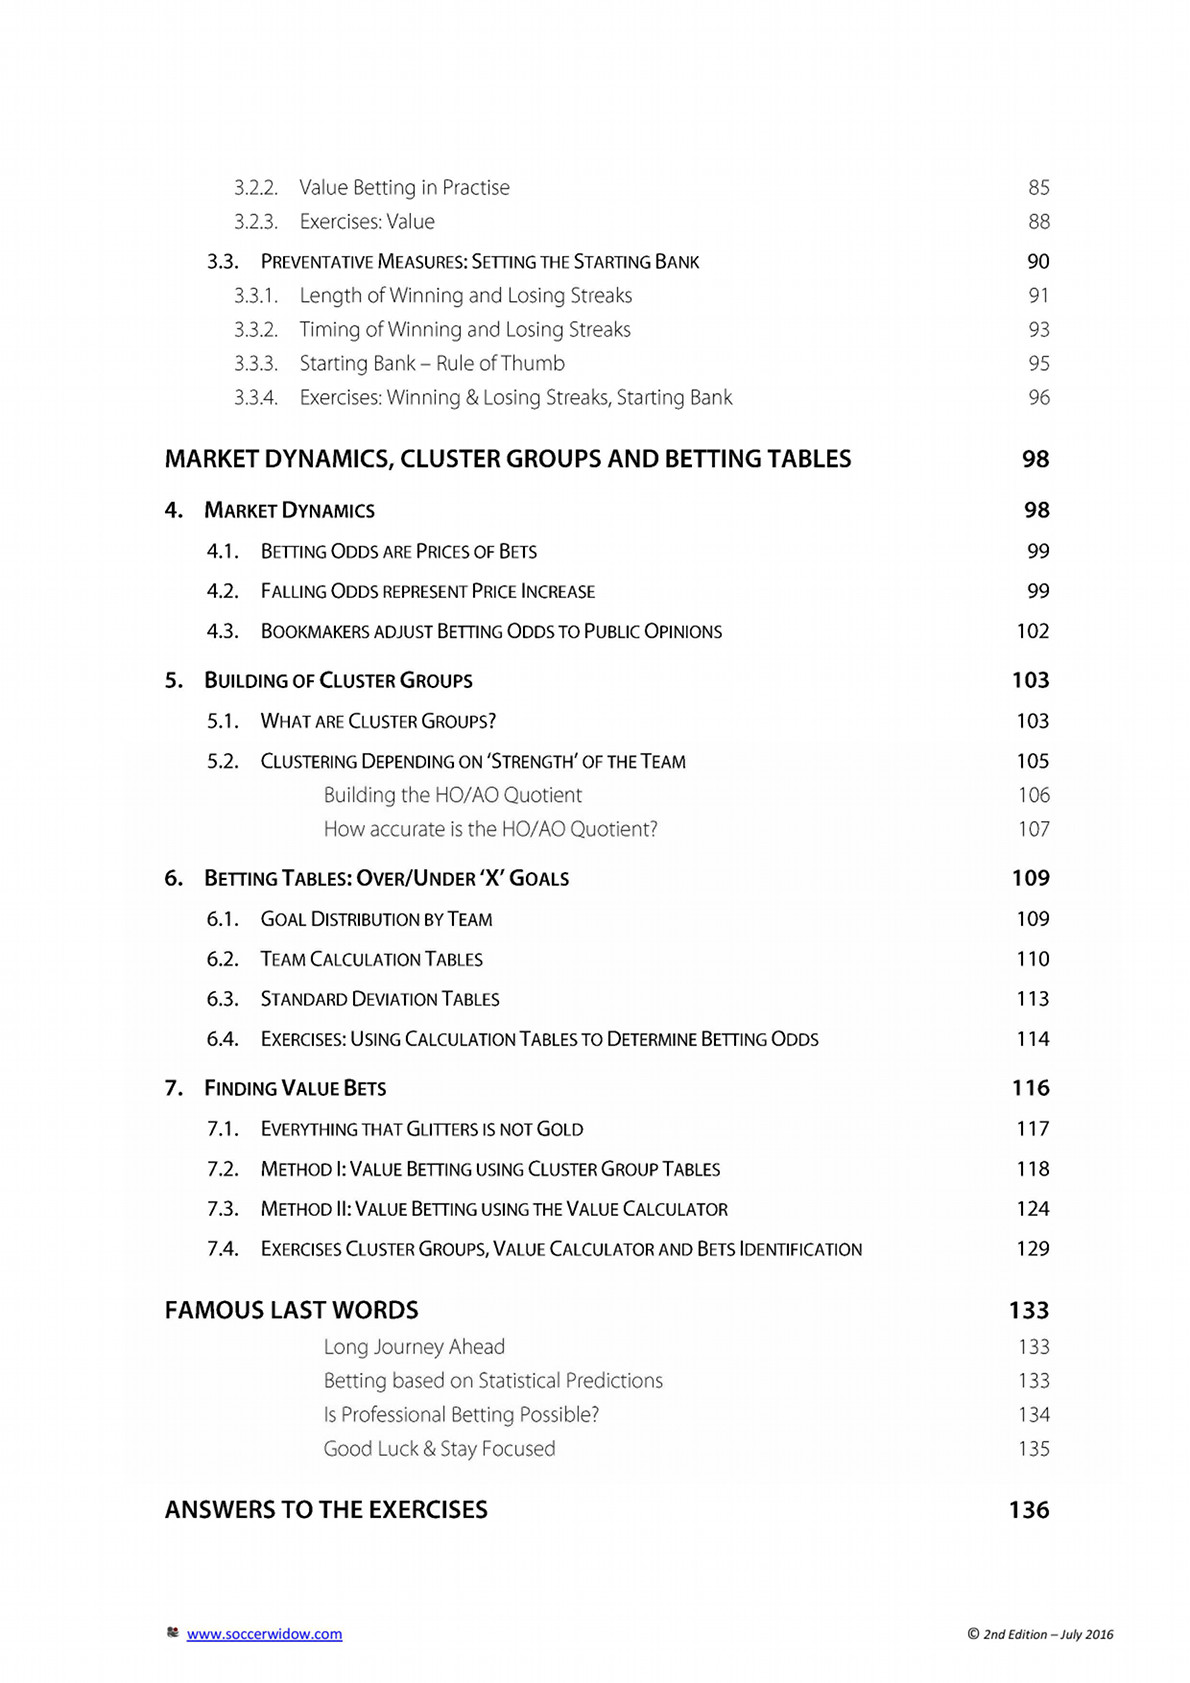 Betting Course Over Under - Table of Contents - page 3